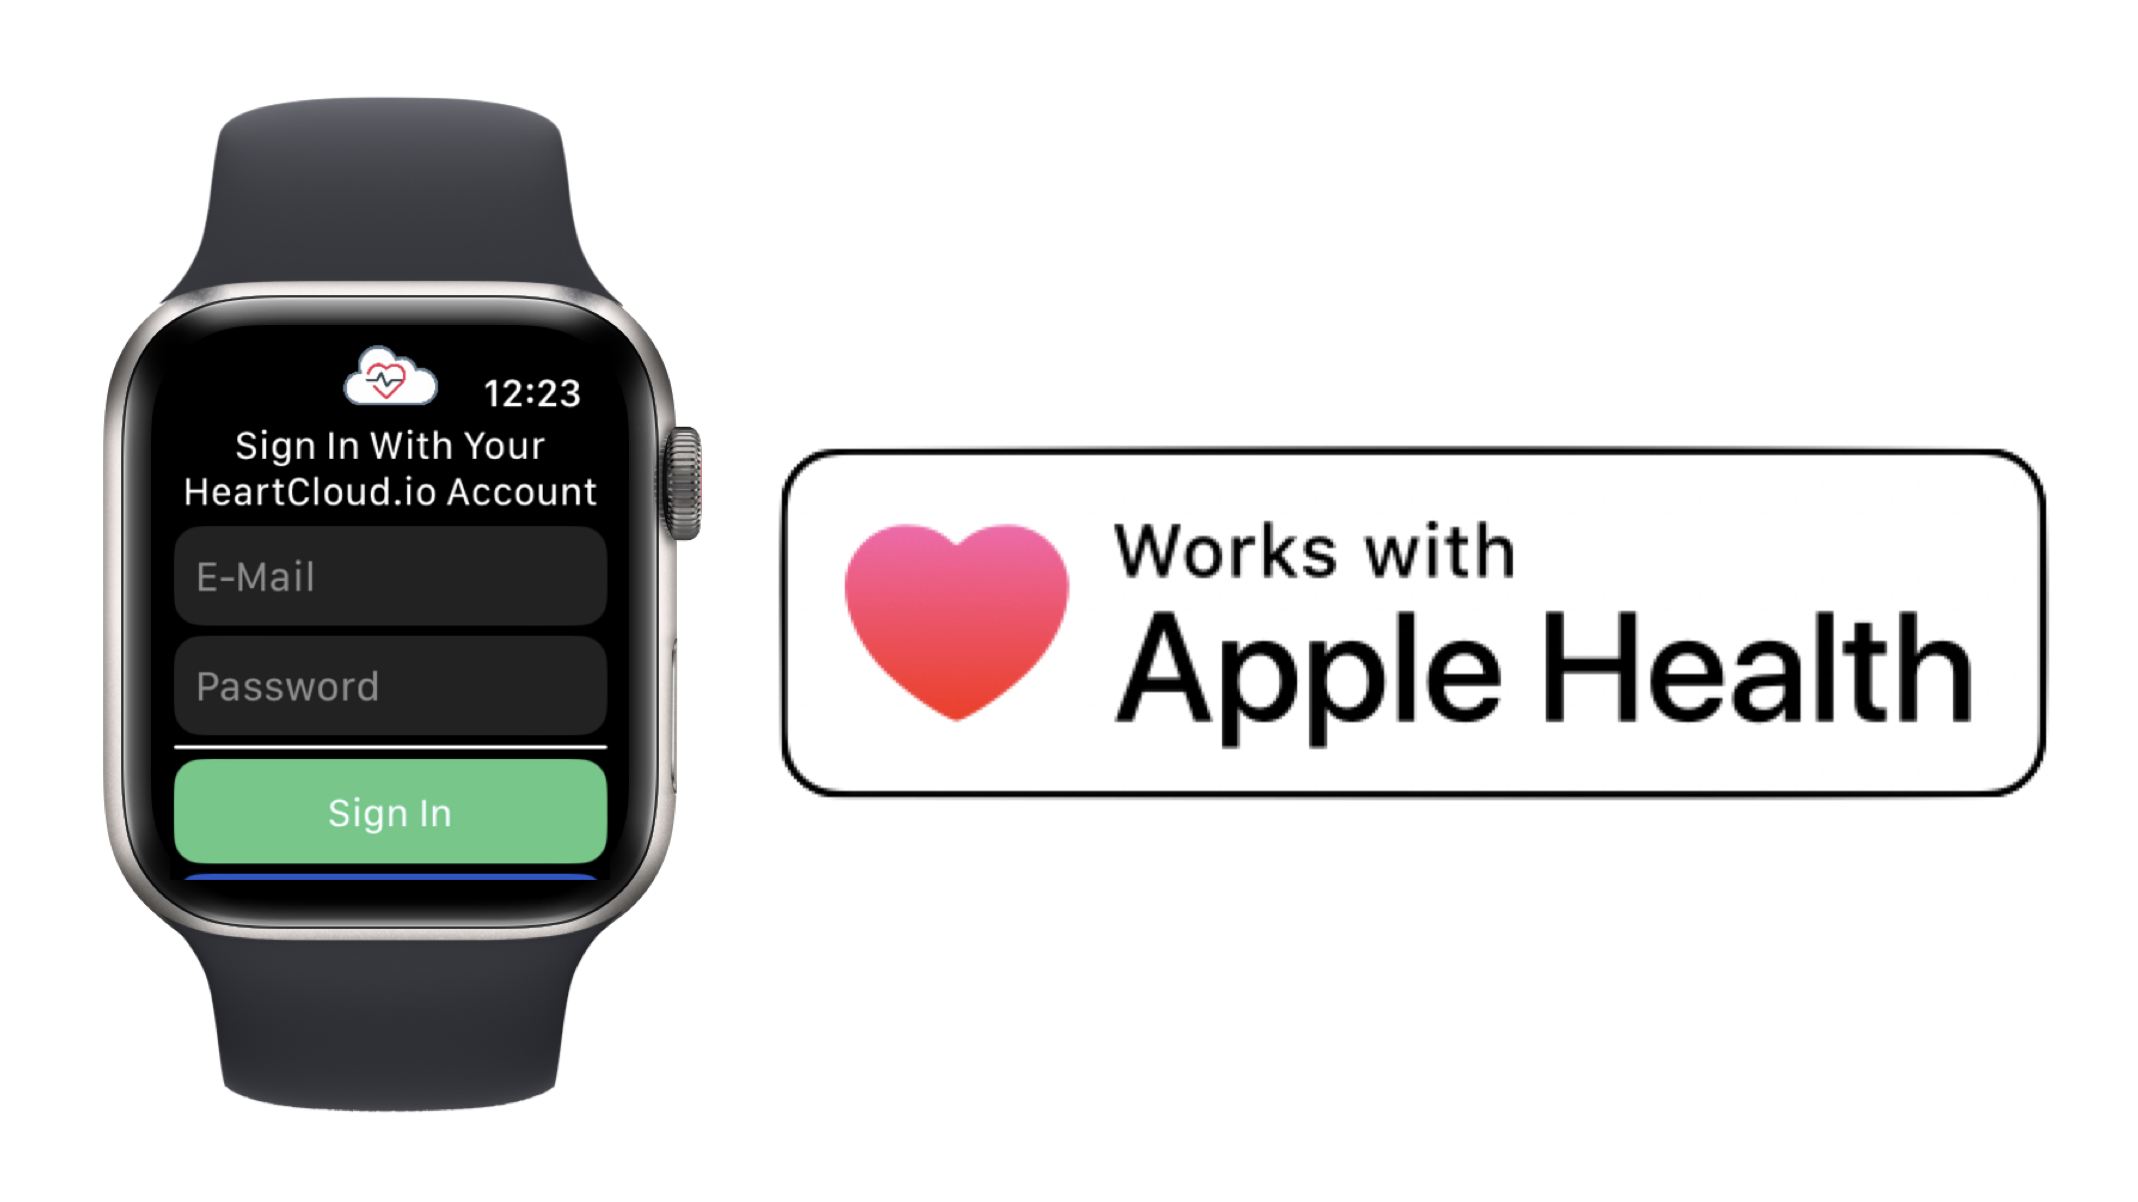 HeartCloud Sync Apple Watch app with sign in page and Works With Apple Health badge to right of Apple Watch image